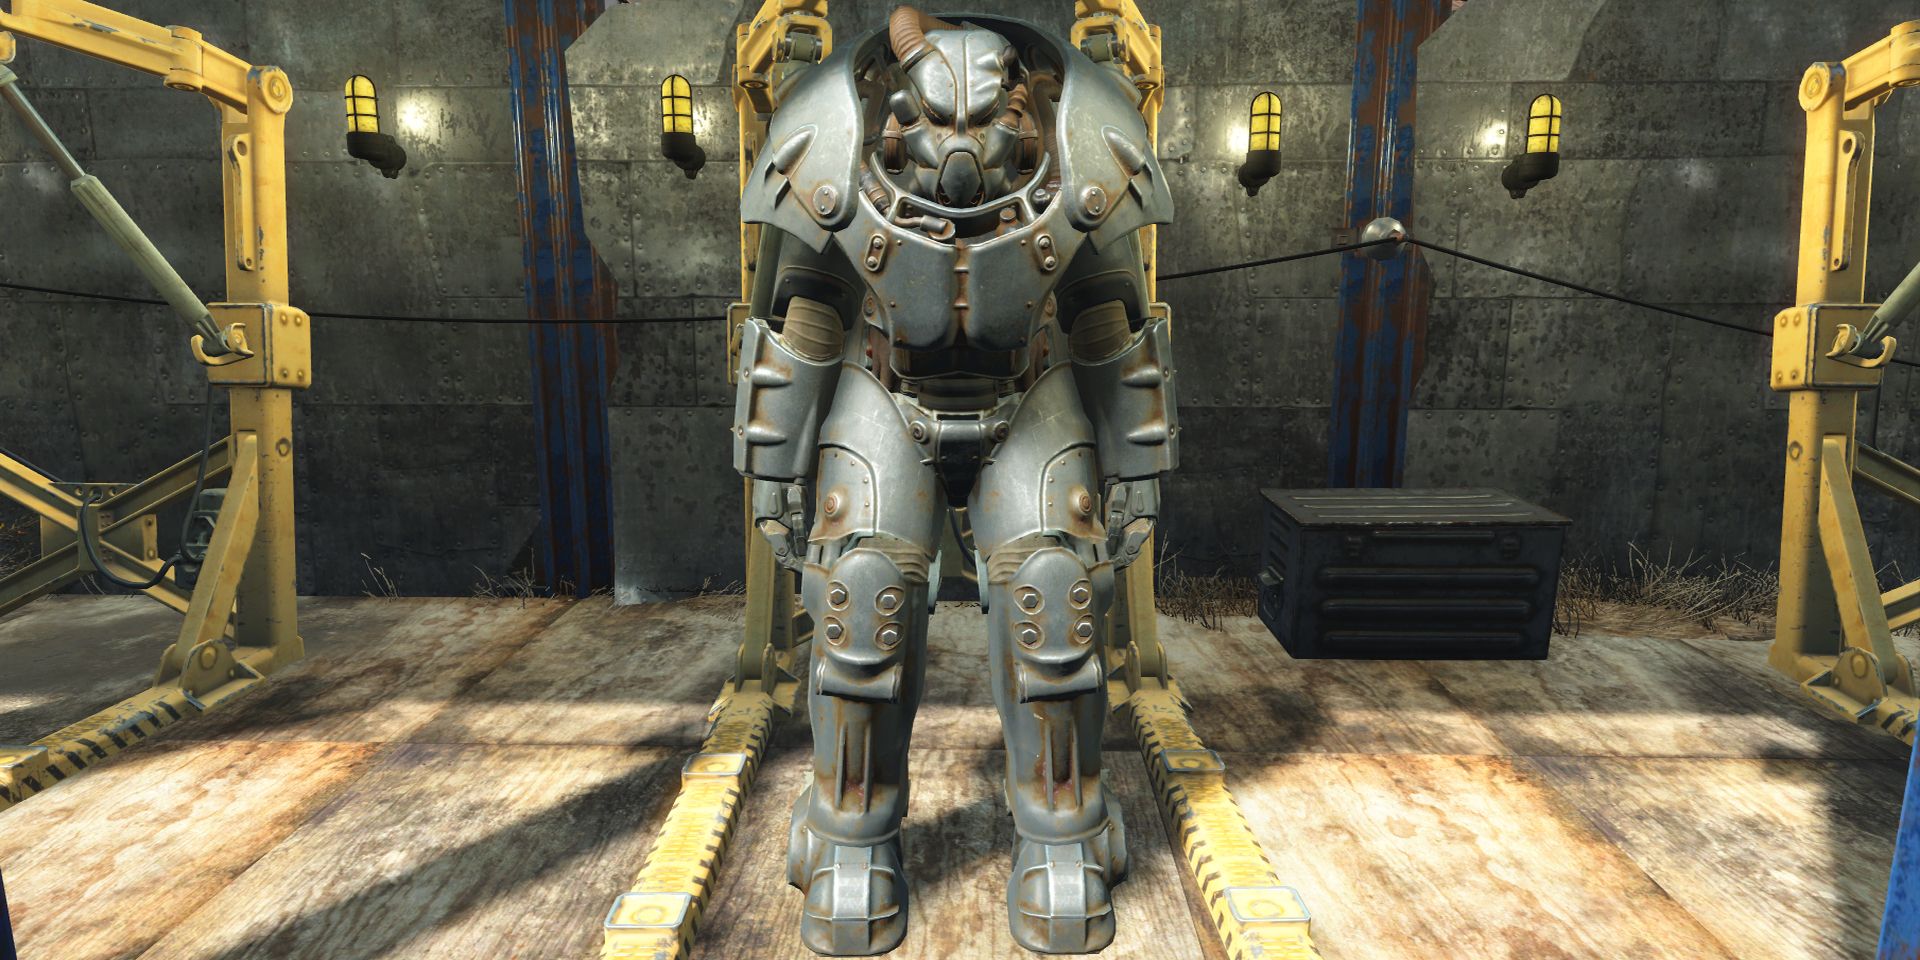 A Power Armor suit in Fallout 4